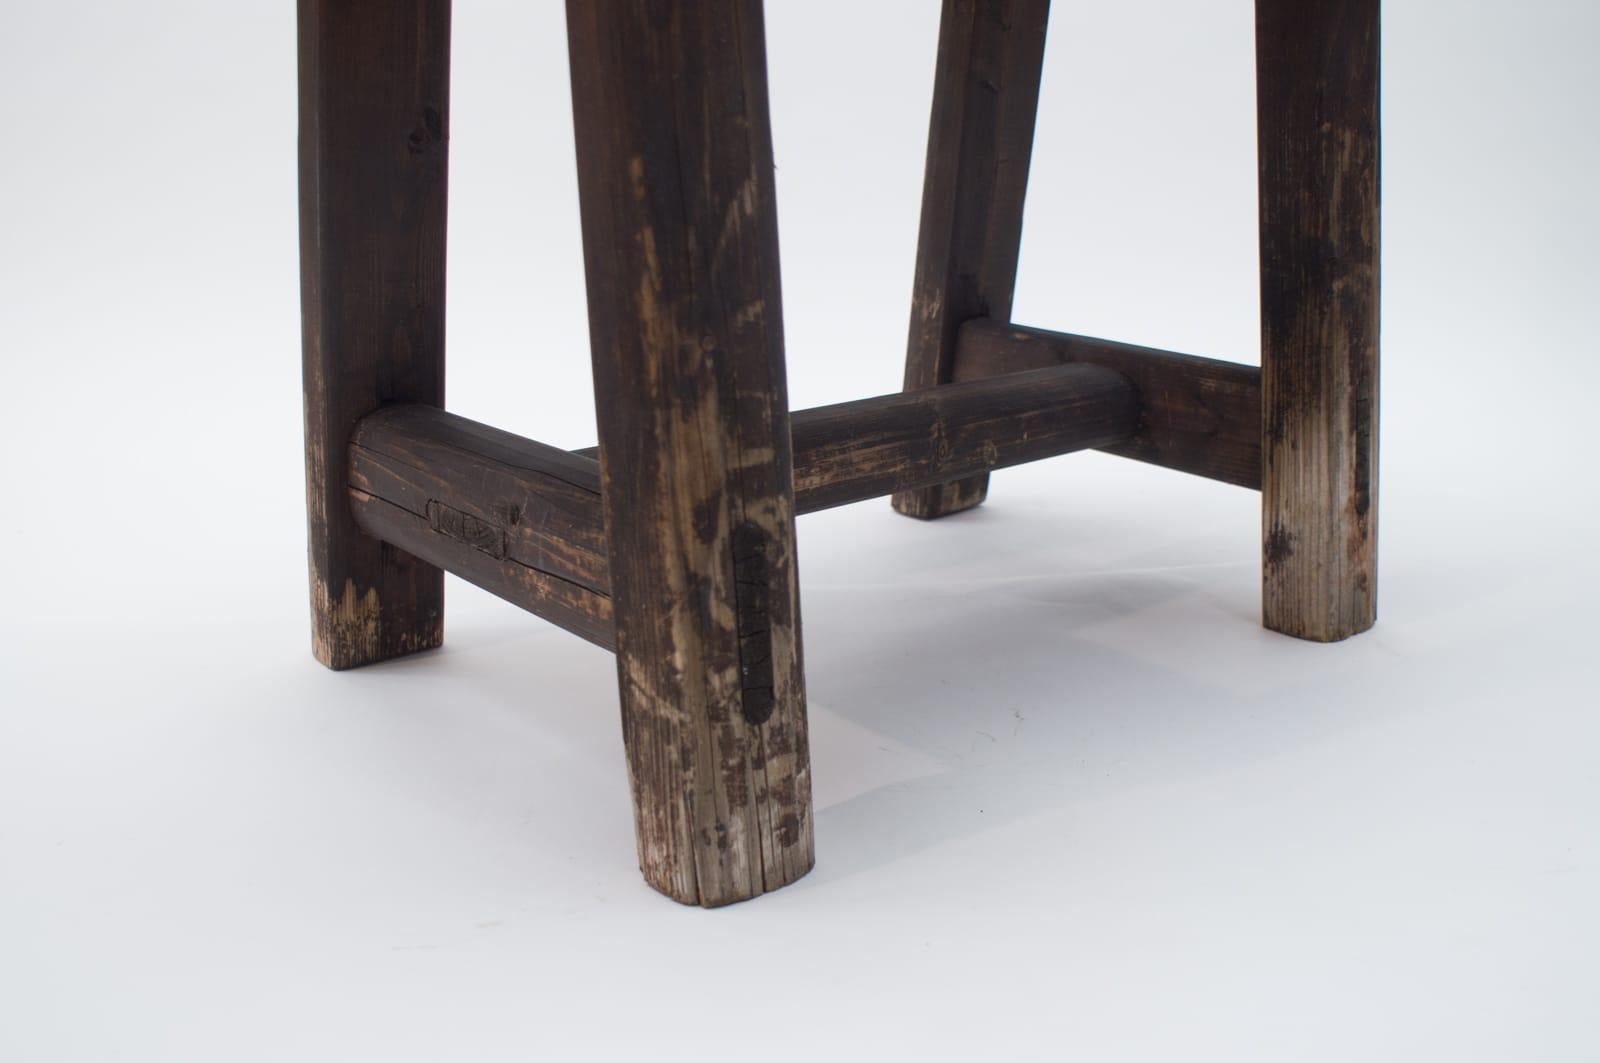 Black Forest Wooden Bench, 1930s-1940s Germany 5